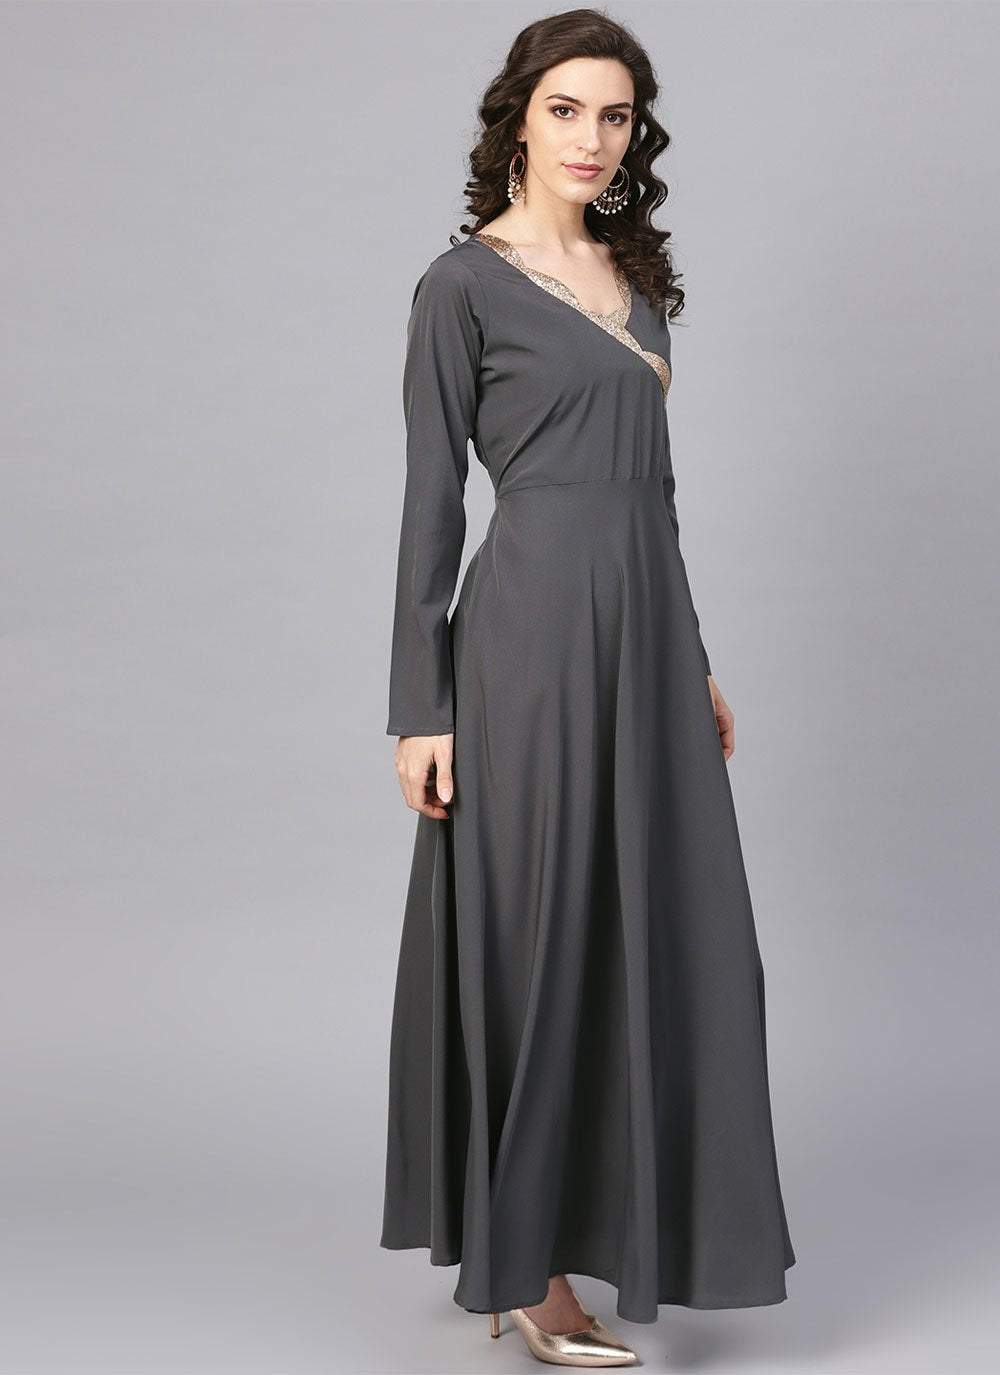 Gown Crepe Silk Grey Lace Gown